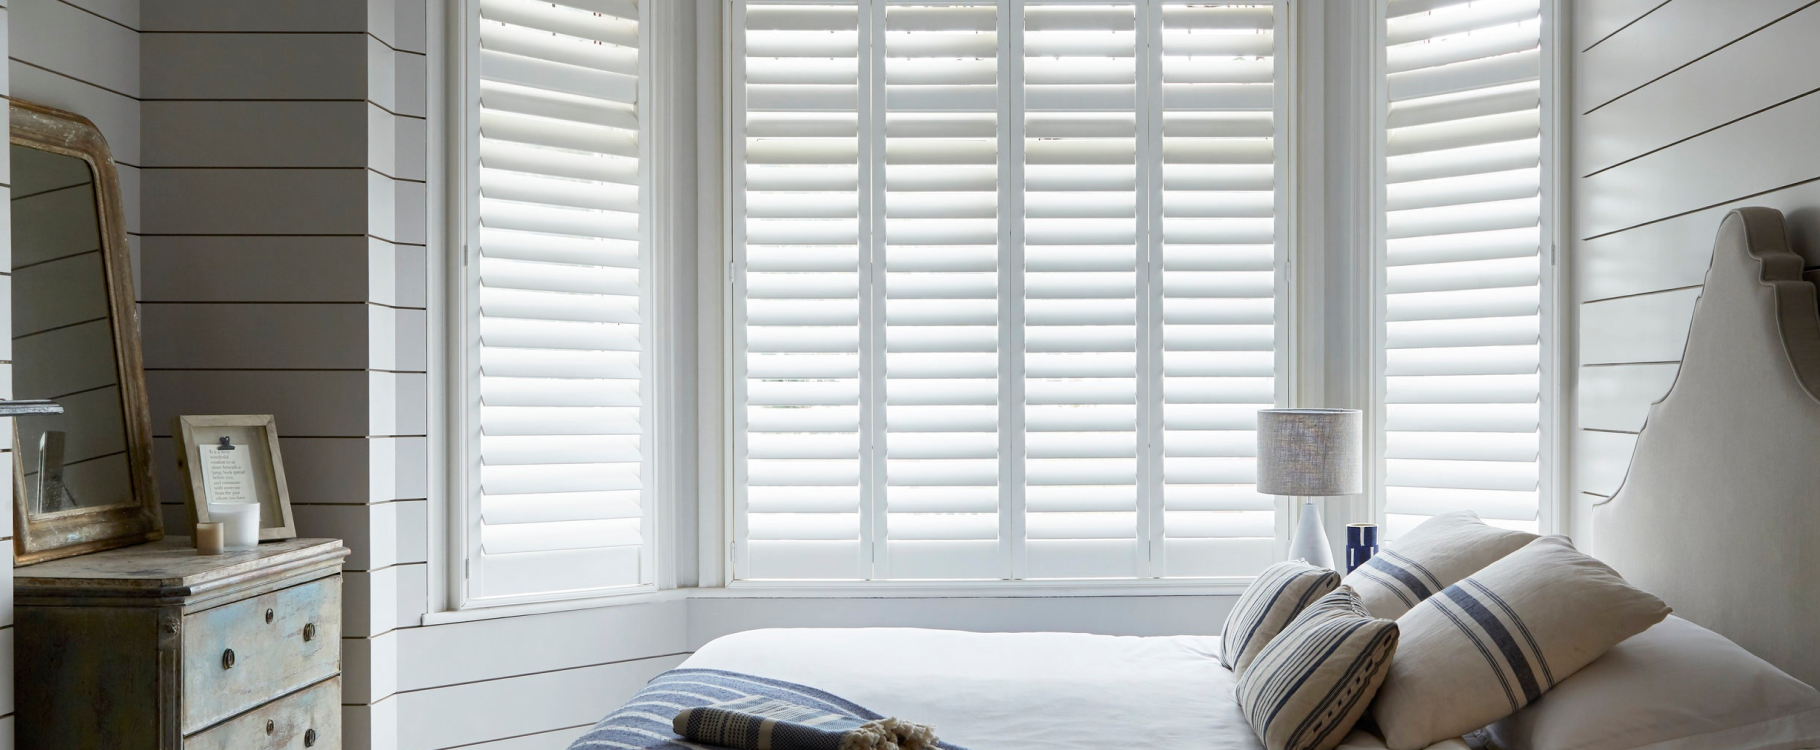 Curtains, Blinds and Shutters: What’s the Best For You?